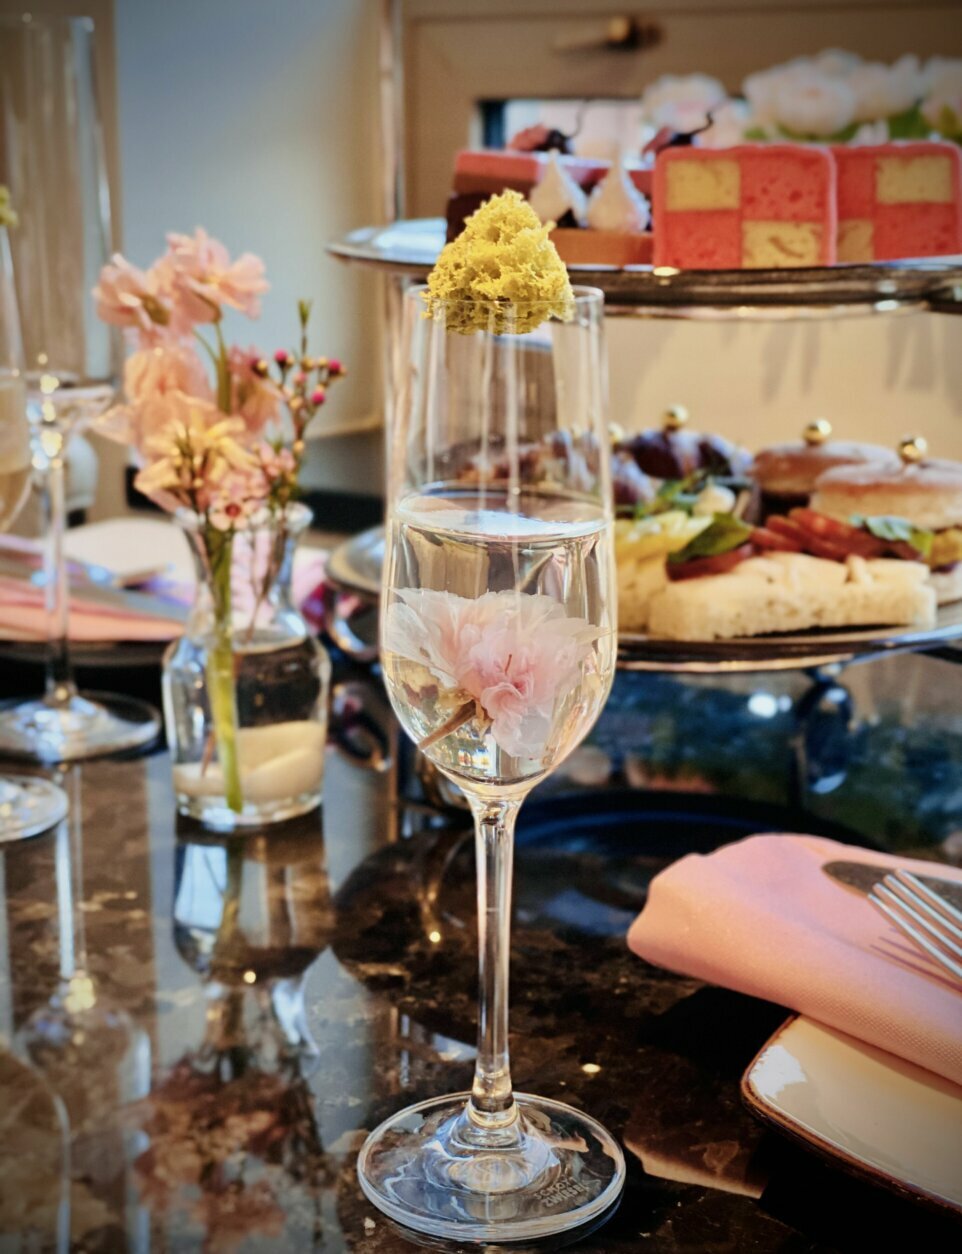 <p><strong>Fairmont Washington D.C. Georgetown&#8217;s sakura and peach blossom gelee</strong>: The Fairmont Georgetown is offering a <a href="http://fairmontwashington.eventbrite.com/" target="_blank" rel="noopener">cherry blossom-themed afternoon tea</a> on weekends from March 27 to April 25. The menu has a mix of sweet and savory fare for the season, and this cocktail is a standout, combining pickled cherry blossoms with peach blossom sake. Space is limited for the afternoon tea ($52-$85), so now&#8217;s the time to score that reservation.</p>
